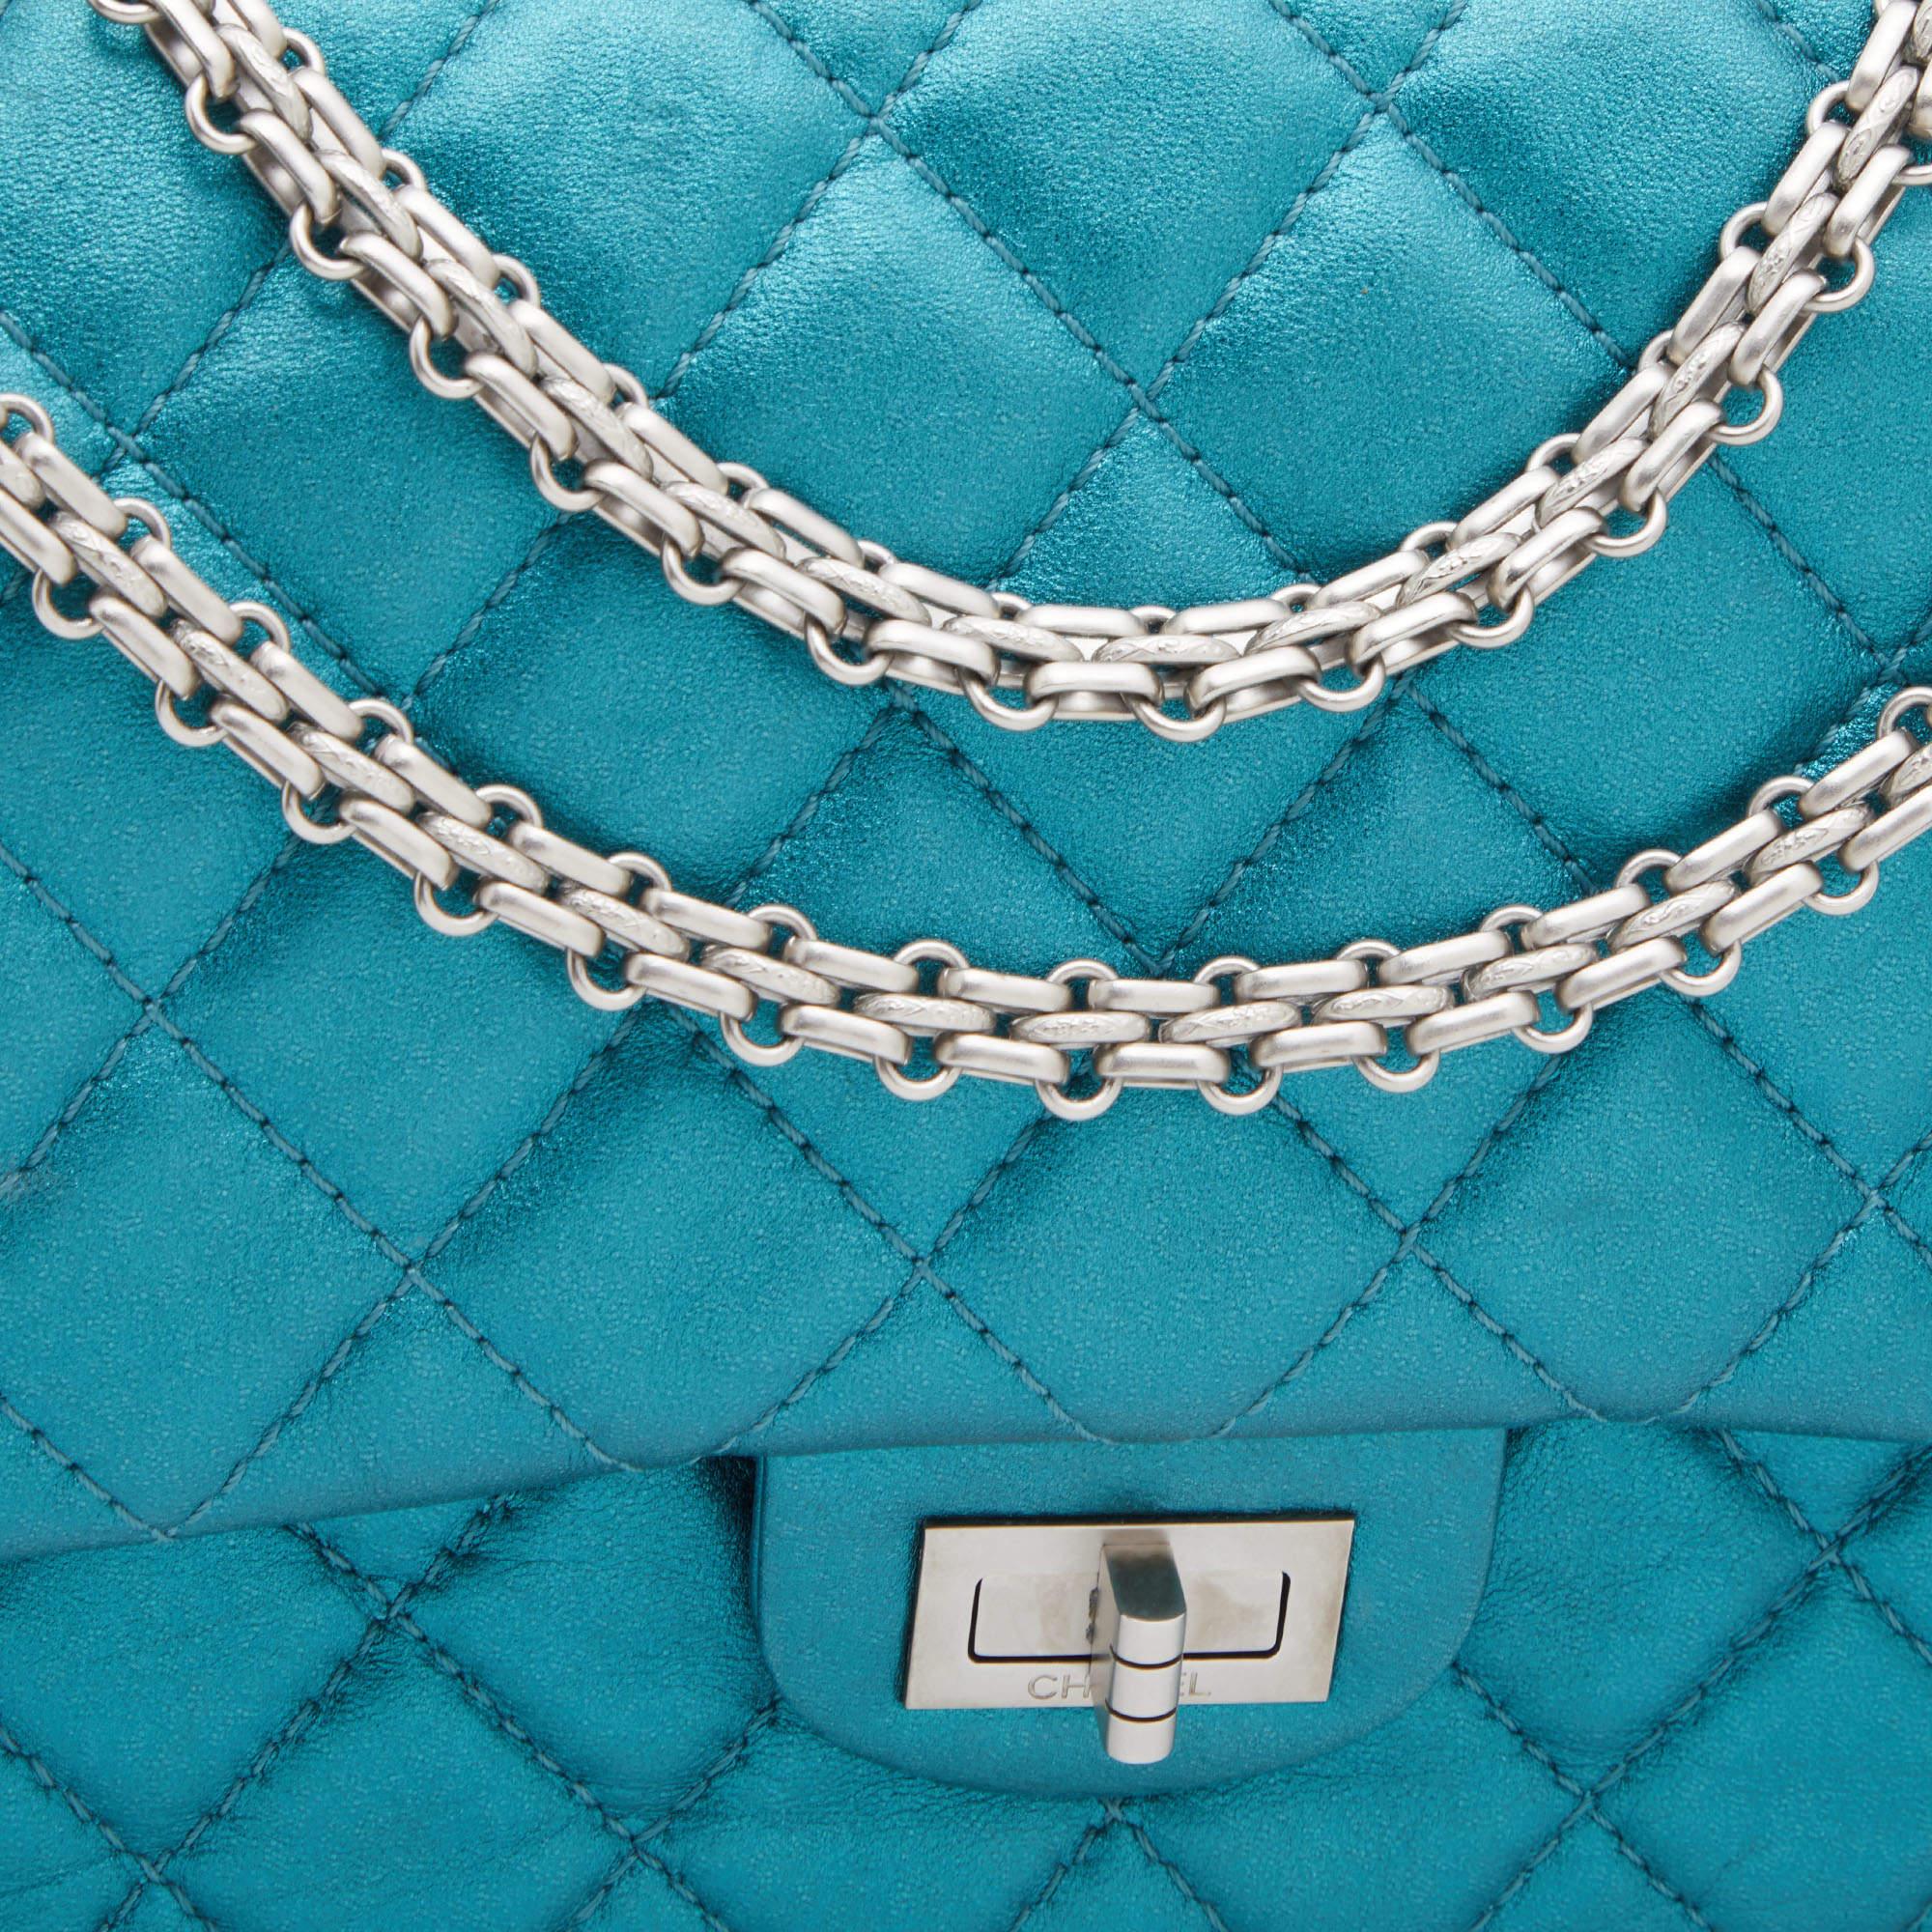 Chanel Metallic Teal Blue Quilted Leather Reissue 2.55 Classic 226 Flap Bag 5